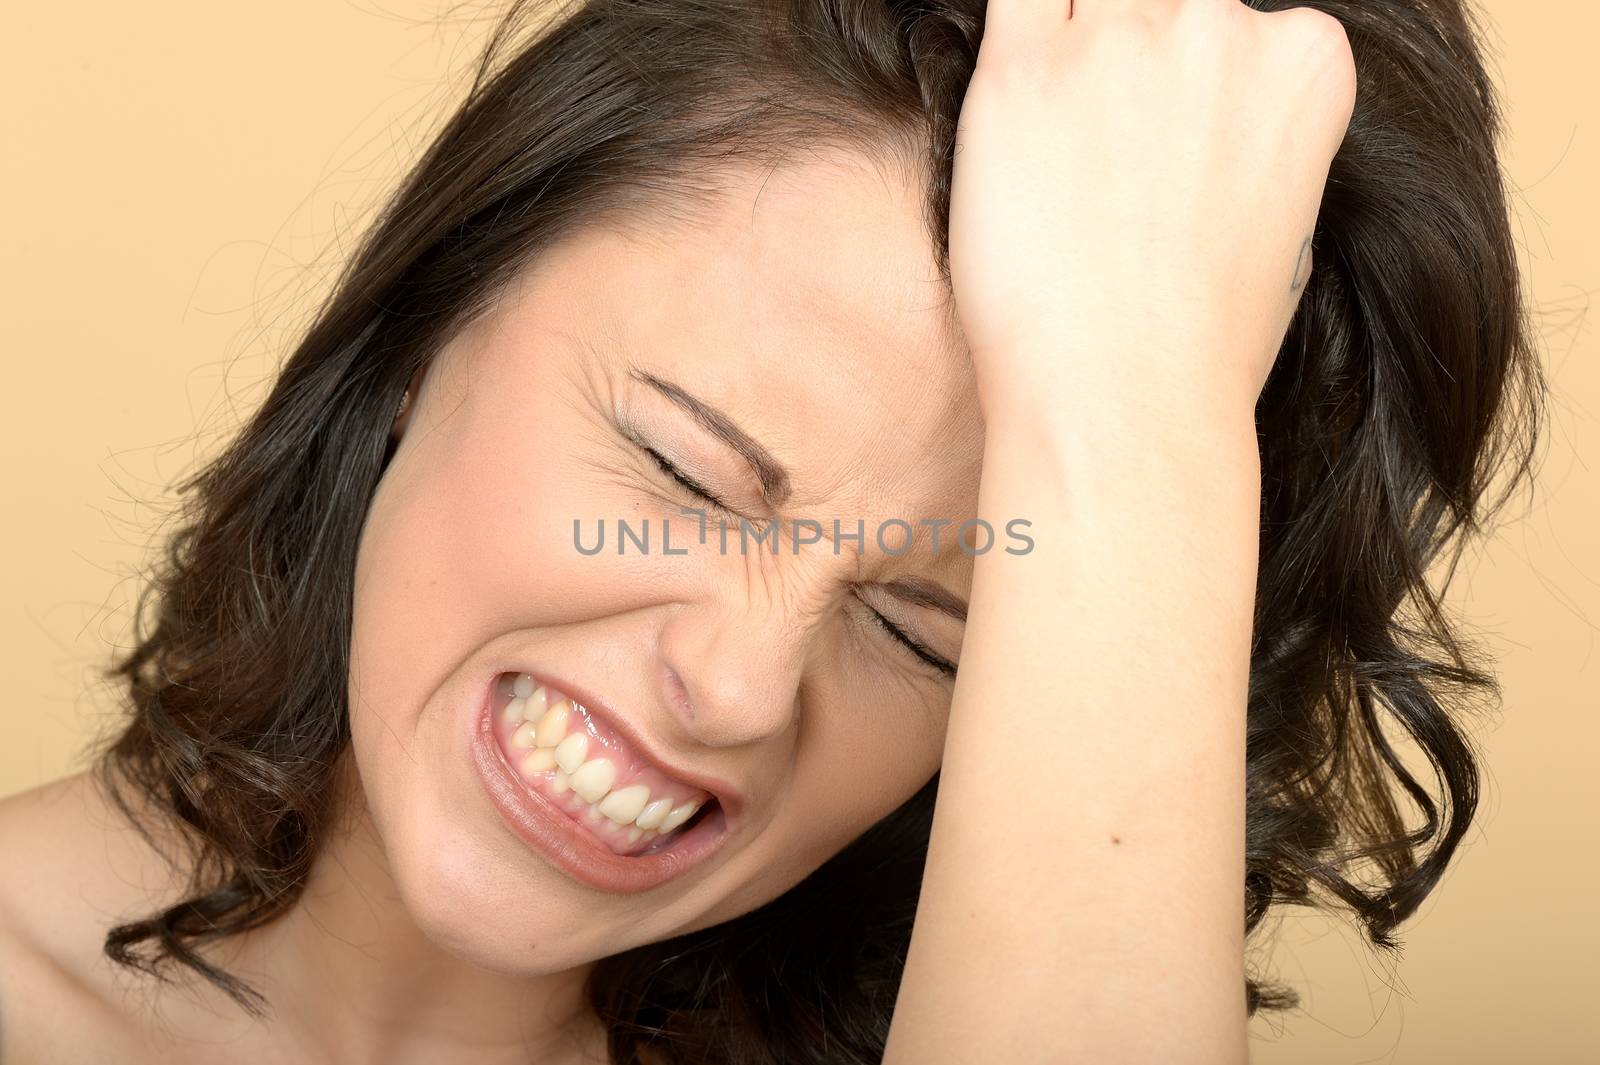 Angry Tense Attractive Young Woman Looking Stressed in a Tantrum